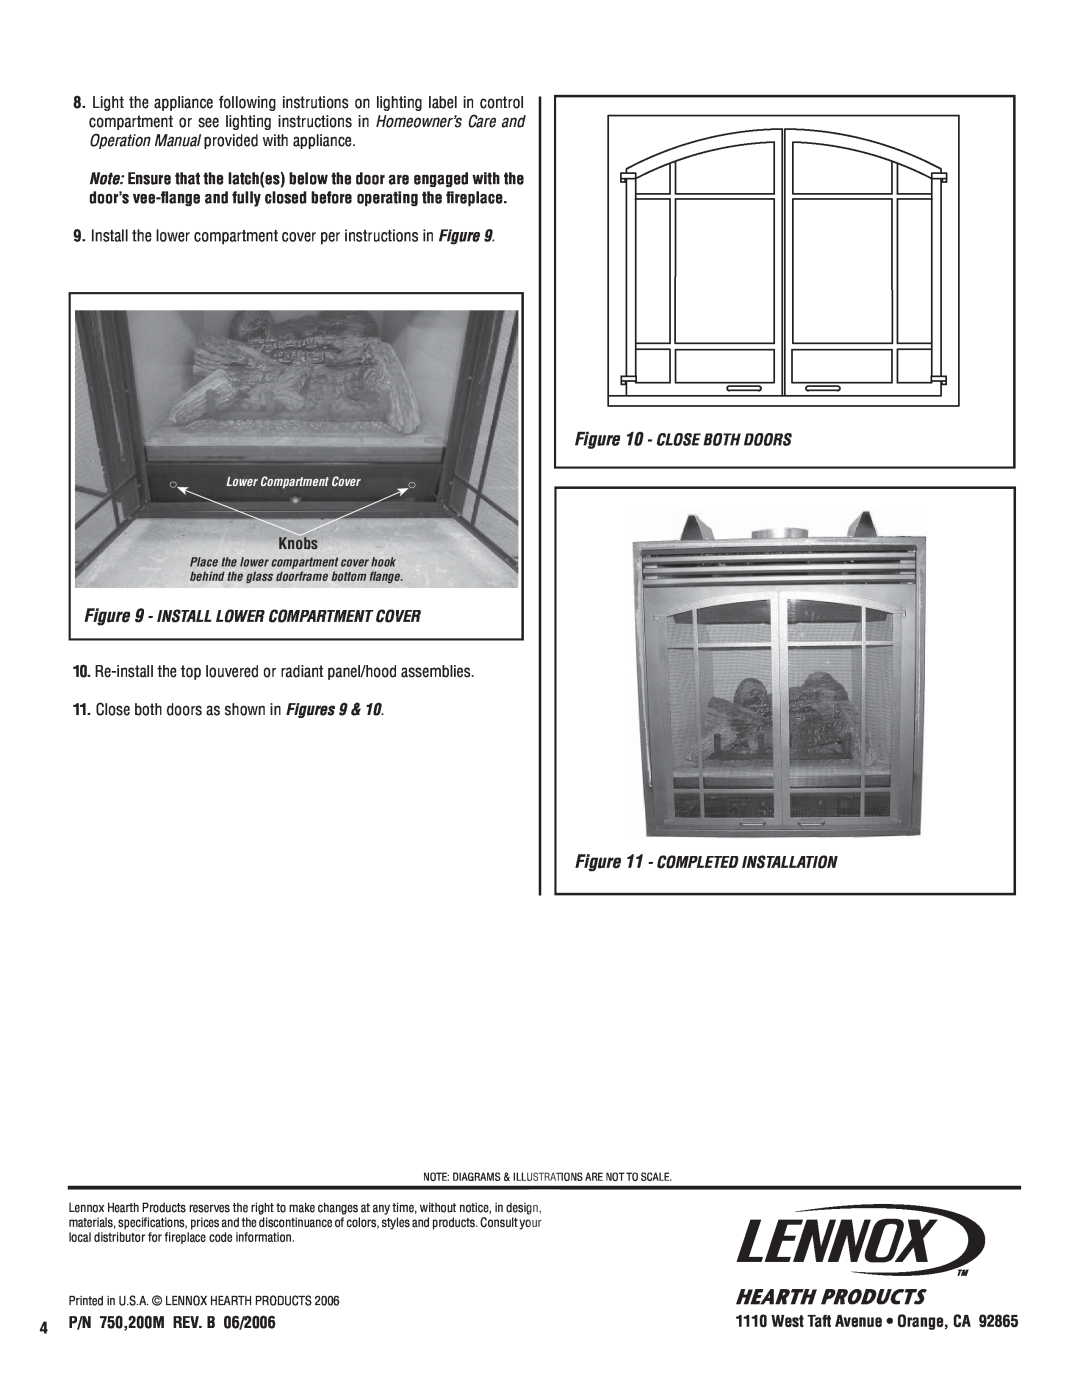 Lennox Hearth TAPD45C, TAPD35C Knobs, Install Lower Compartment Cover, Completed Installation, P/N 750,200M REV. B 06/2006 